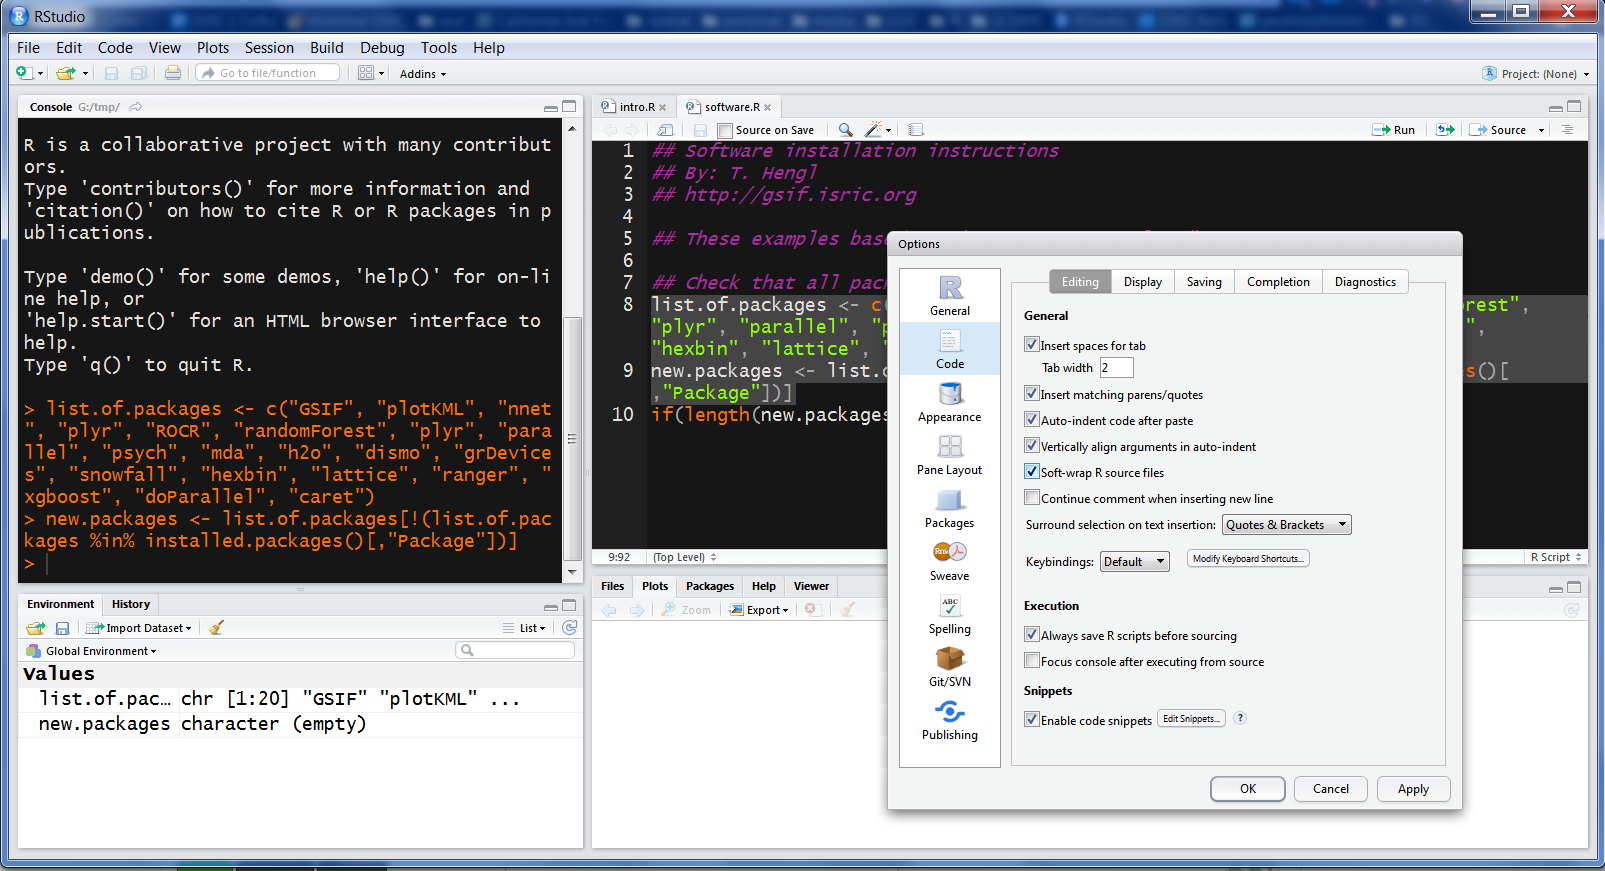 RStudio is a commonly used R editor written in C++.